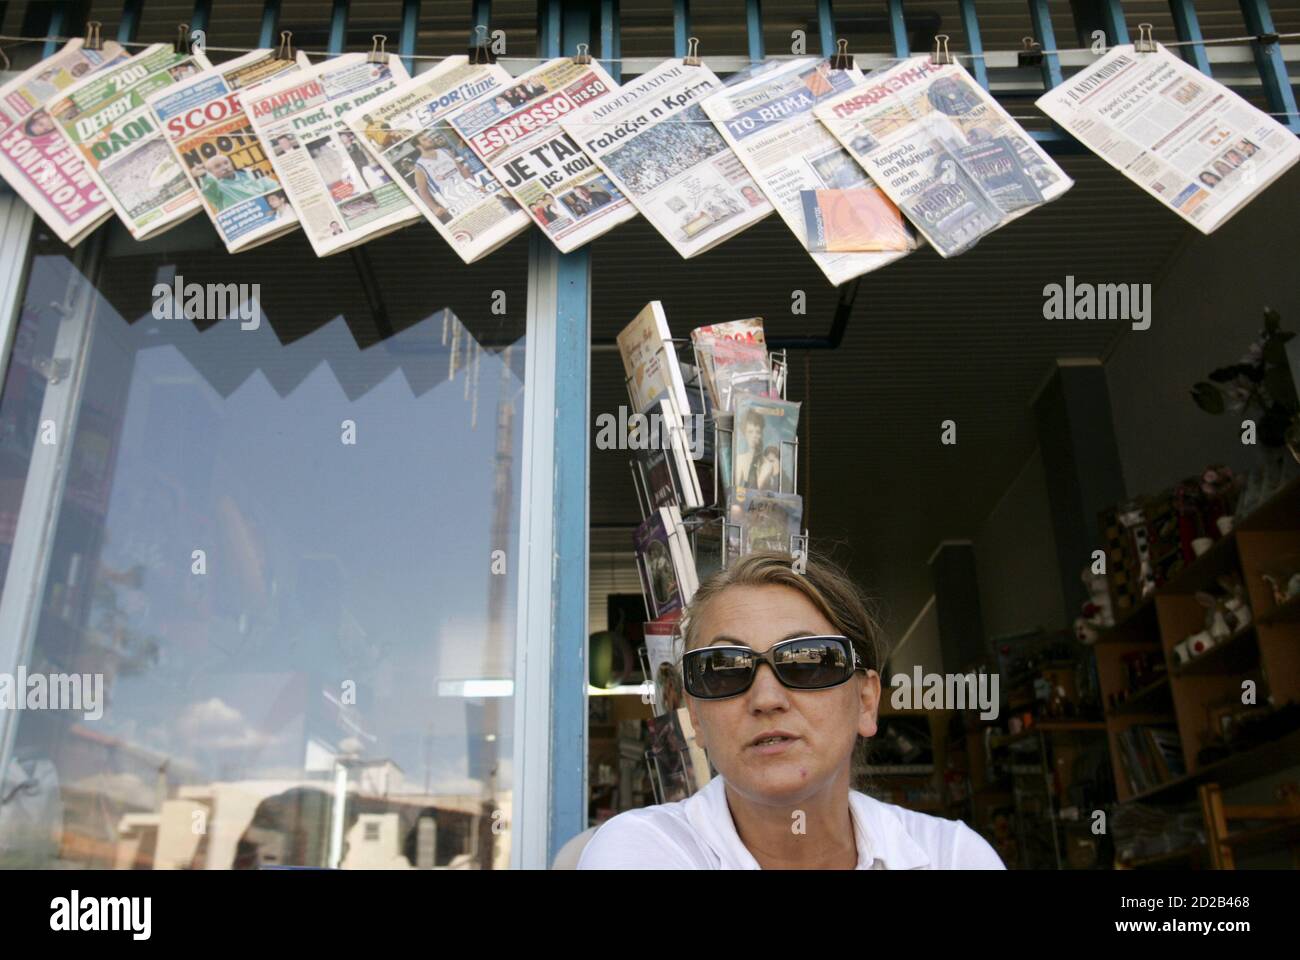 Shop owner Christina Bakou, 41, sits in front of her shop in the town of Kirra in central Greece, some 200km (124 miles) west of Athens, September 11, 2007. Days before a closely fought Greek election, a deep political divide has gripped the town of Kirra, which correctly predicted the result of the last parliamentary vote. Picture taken September 11, 2007. REUTERS/Yiorgos Karahalis  (GREECE) Stock Photo